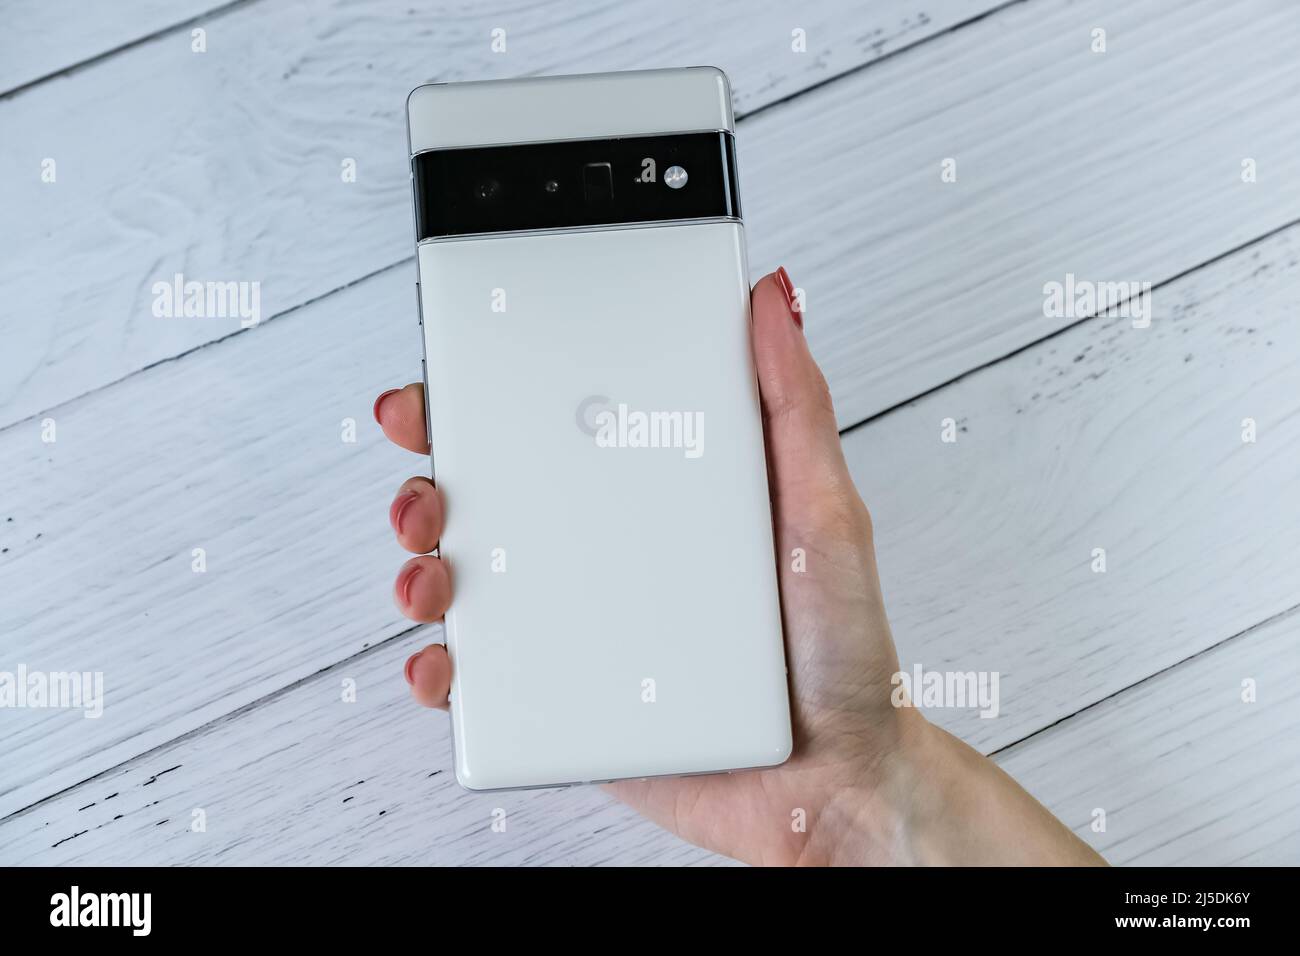 Google Pixel 6 Pro in cloudy white color Stock Photo - Alamy